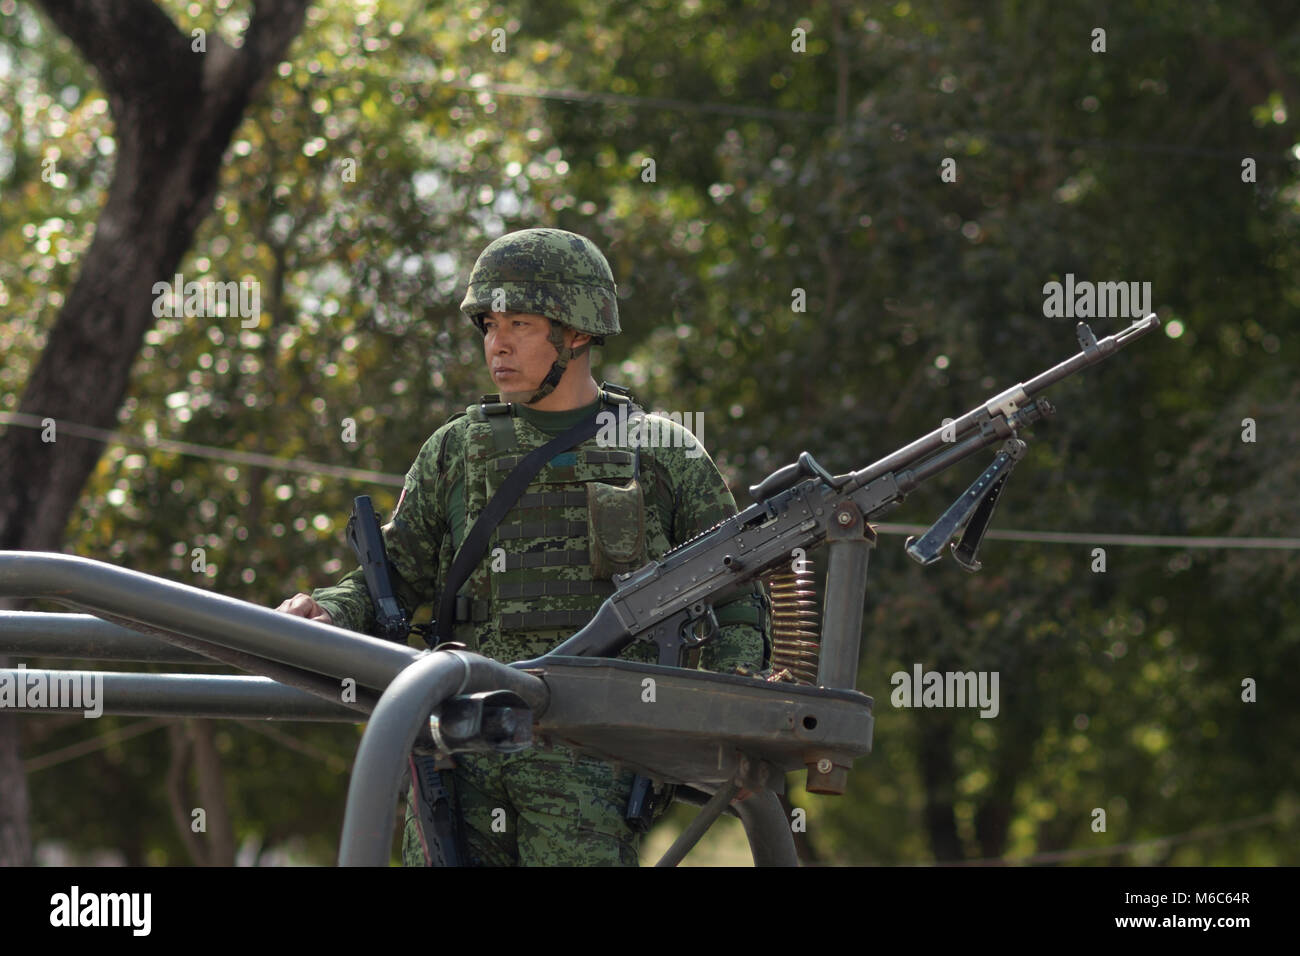 Matamoros, Tamaulipas, Mexico - February 24, 2018: Mexican armed forces during operations in north easthern Mexico. Stock Photo